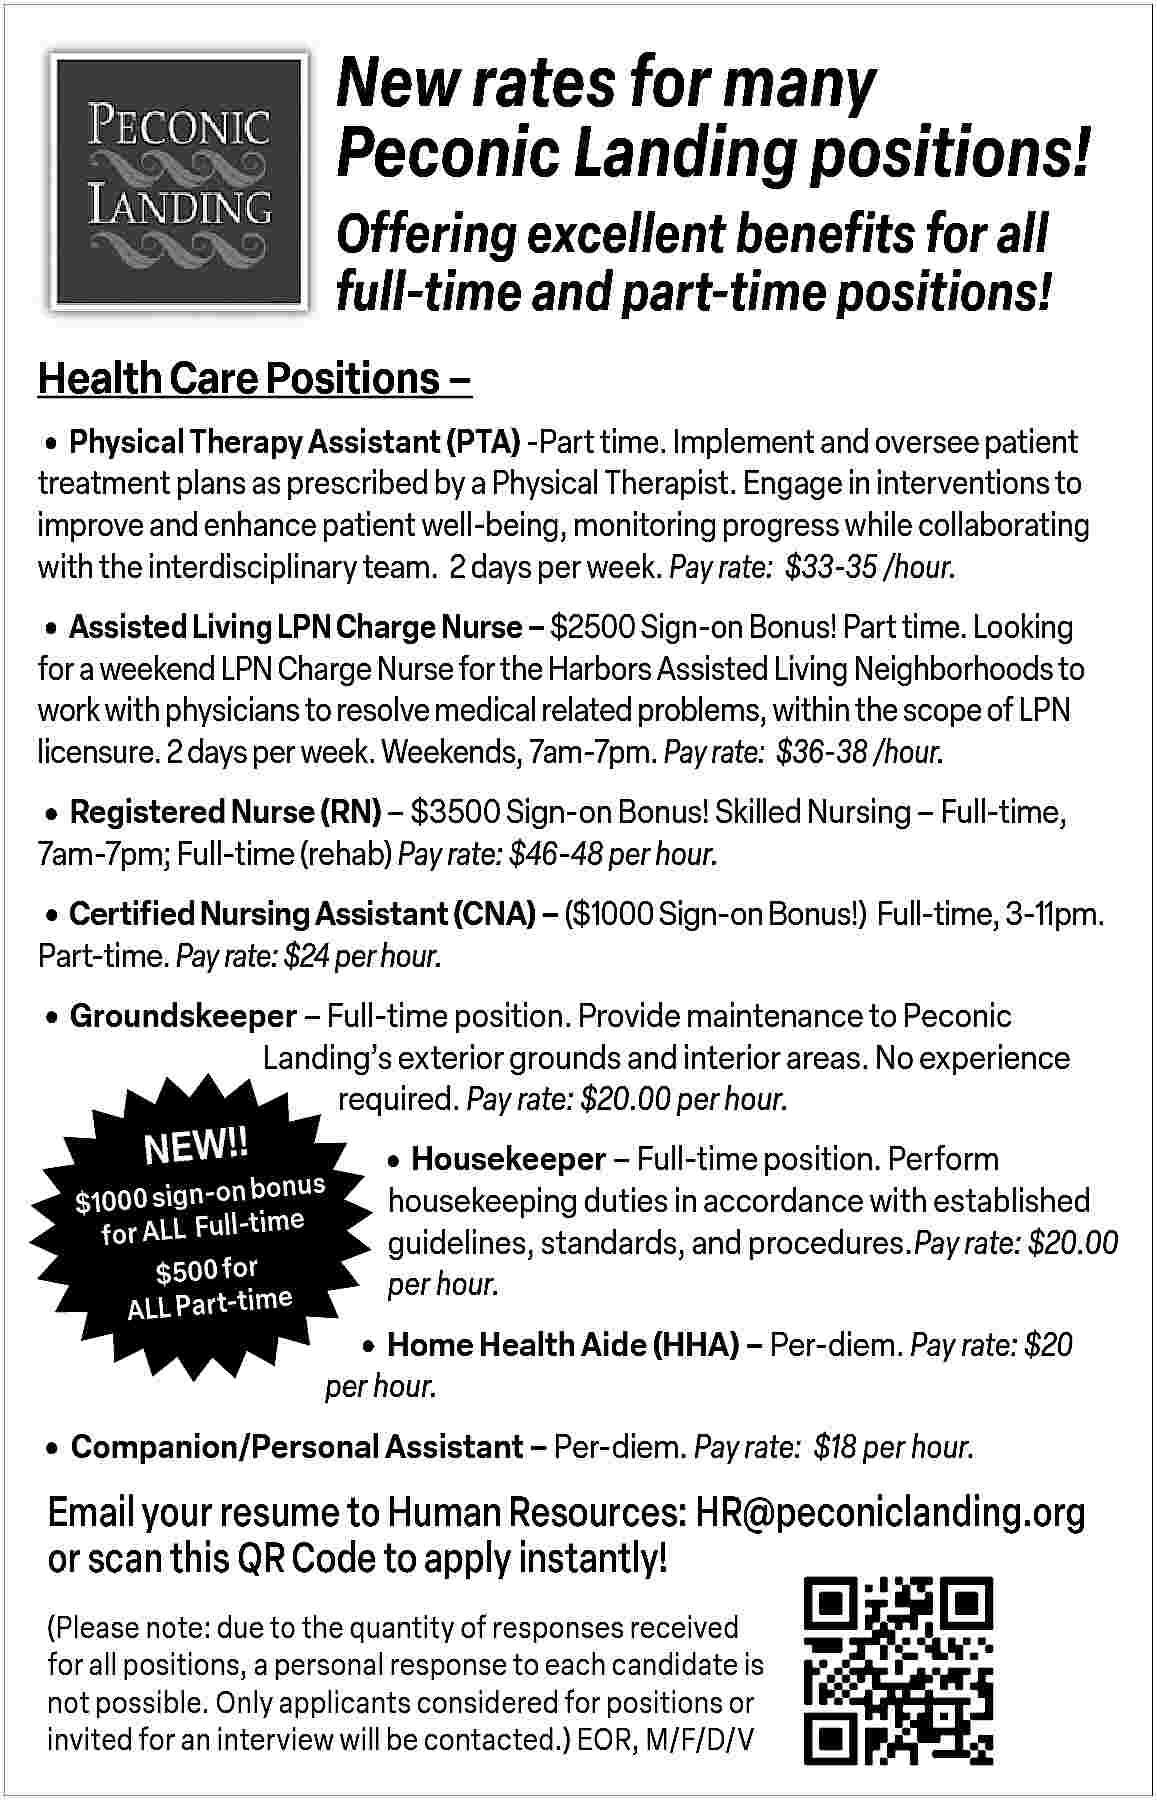 New rates for many <br>Peconic  New rates for many  Peconic Landing positions!  Offering excellent benefits for all  full-time and part-time positions!  Health Care Positions               Physical Therapy Assistant (PTA) -Part time. Implement and oversee patient  treatment plans as prescribed by a Physical Therapist. Engage in interventions to  improve and enhance patient well-being, monitoring progress while collaborating  with the interdisciplinary team. 2 days per week. Pay rate: $33-35 /hour.        Assisted Living LPN Charge Nurse     $2500 Sign-on Bonus! Part time. Looking    for a weekend LPN Charge Nurse for the Harbors Assisted Living Neighborhoods to  work with physicians to resolve medical related problems, within the scope of LPN  licensure. 2 days per week. Weekends, 7am-7pm. Pay rate: $36-38 /hour.        Registered Nurse (RN)     $3500 Sign-on Bonus! Skilled Nursing     Full-time,  7am-7pm; Full-time (rehab) Pay rate: $46-48 per hour.        Certified Nursing Assistant (CNA)     ($1000 Sign-on Bonus!) Full-time, 3-11pm.  Part-time. Pay rate: $24 per hour.        Groundskeeper     Full-time position. Provide maintenance to Peconic  NEW!!    Landing   s exterior grounds and interior areas. No experience  required. Pay rate: $20.00 per hour.    bonus  $1000 sign-on  e  for ALL   Full-tim  r  fo  00  $5  ALL Part-time        Housekeeper     Full-time position. Perform           housekeeping duties in accordance with established  guidelines, standards, and procedures.Pay rate: $20.00  per hour.    Home Health Aide (HHA)     Per-diem. Pay rate: $20  per hour.        Companion/Personal Assistant     Per-diem. Pay rate: $18 per hour.    Email your resume to Human Resources: HR@peconiclanding.org  or scan this QR Code to apply instantly!  (Please note: due to the quantity of responses received  for all positions, a personal response to each candidate is  not possible. Only applicants considered for positions or  invited for an interview will be contacted.) EOR, M/F/D/V     